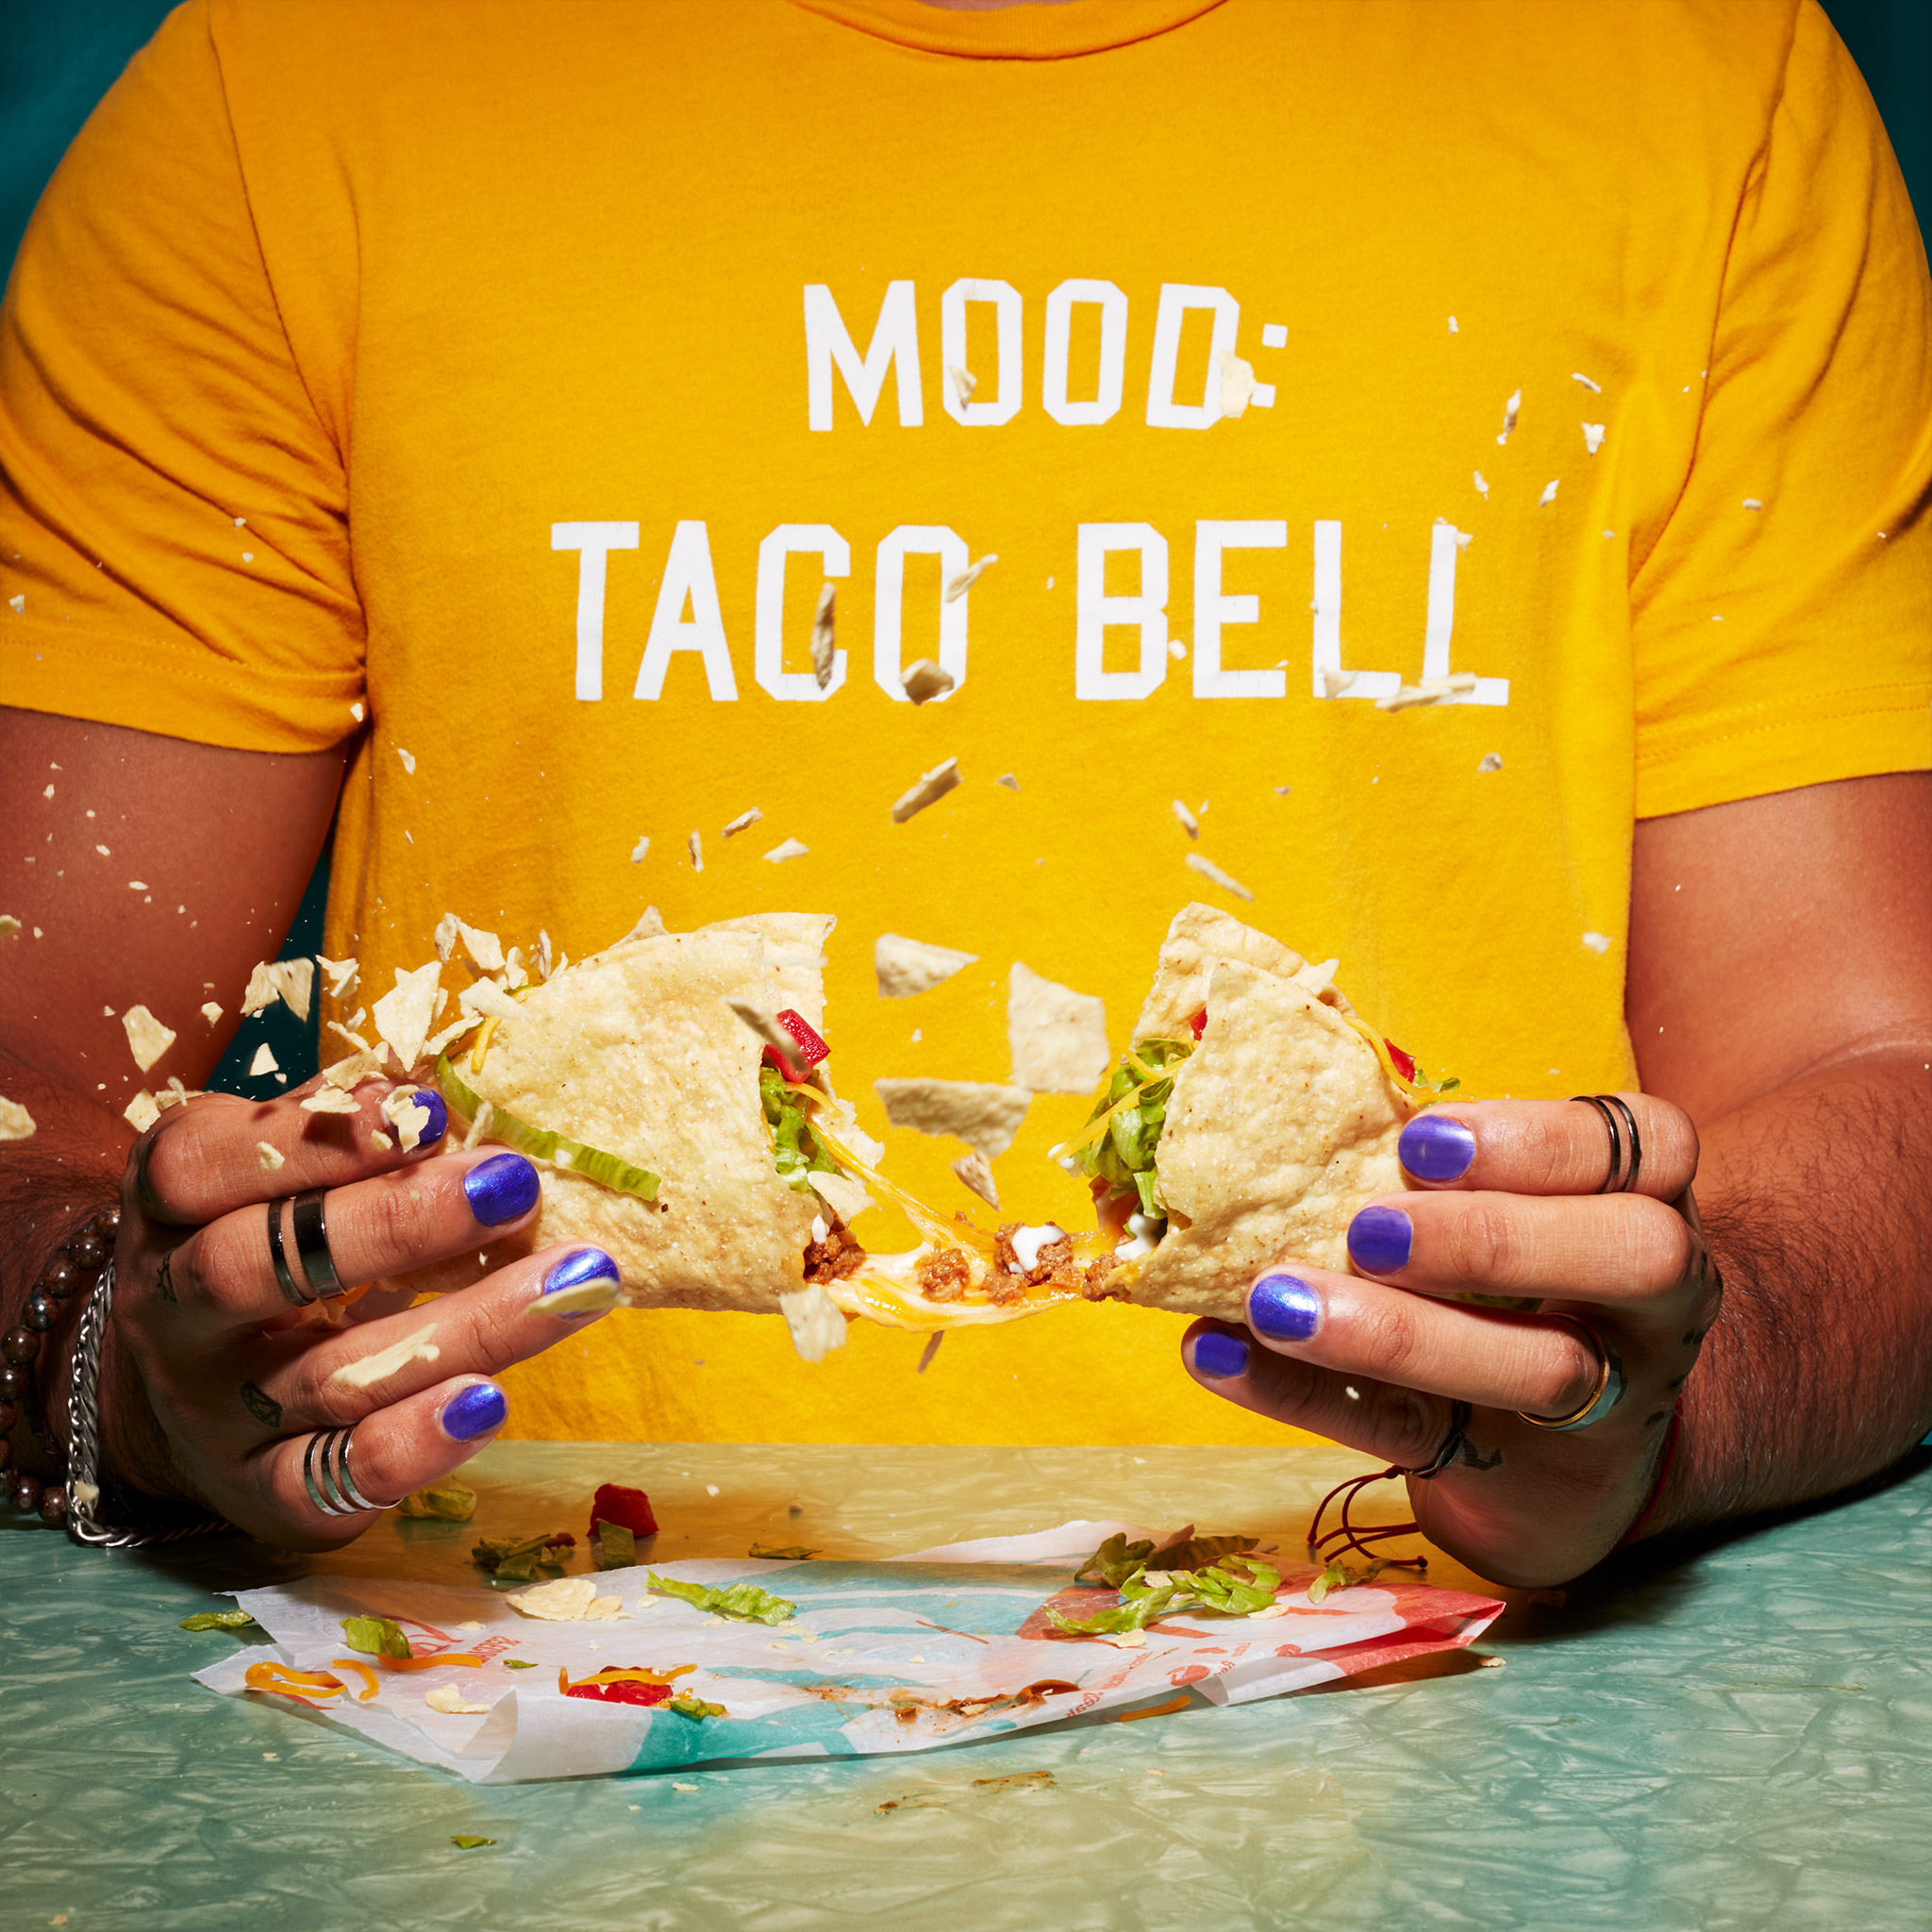 Annabelle_Breakey_Food_Beverage_Photography_Mood_Taco_Bell_Taco